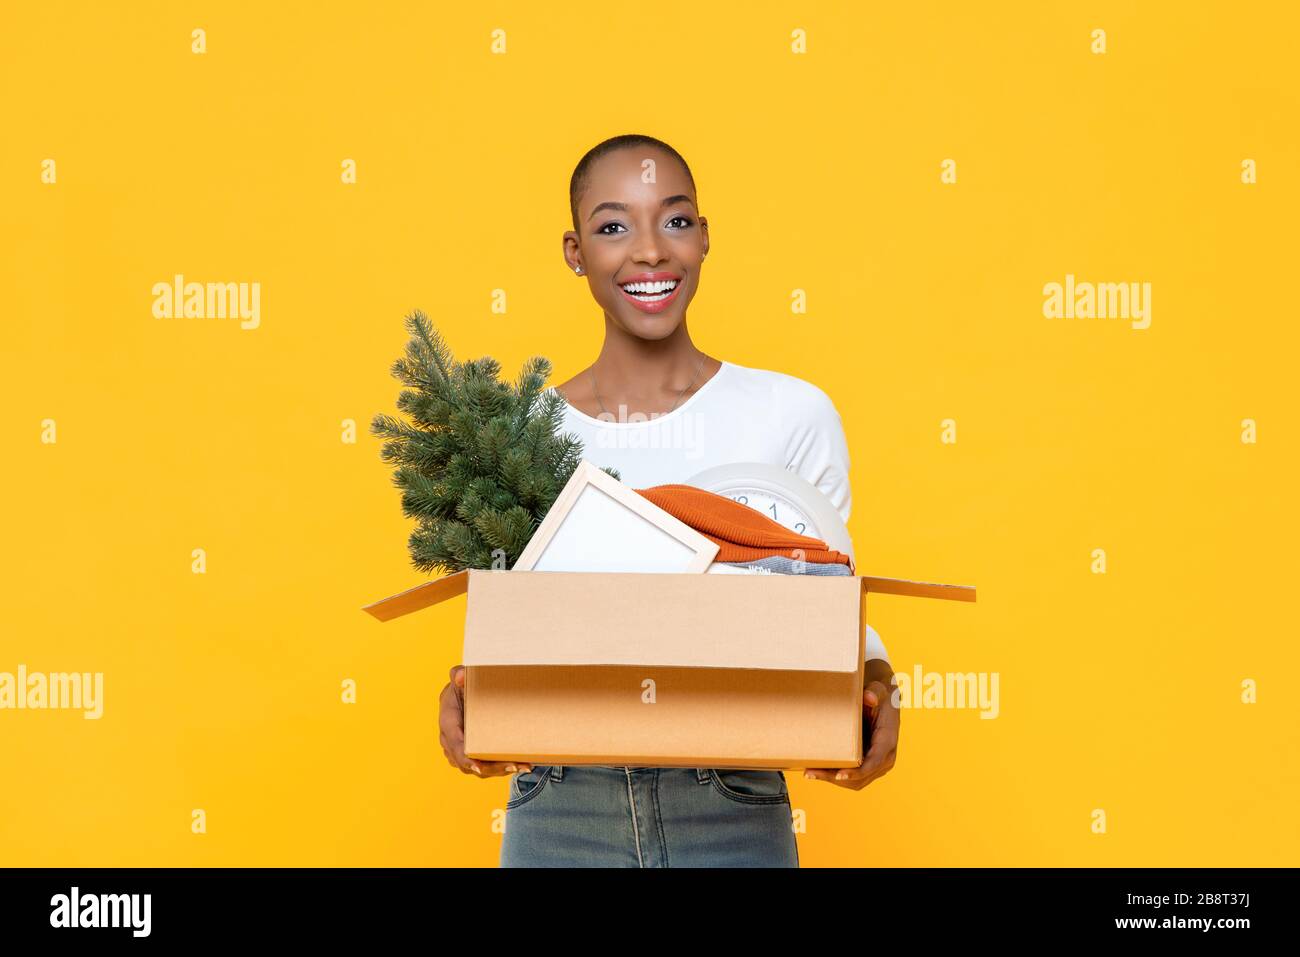 Happy smiling African American woman holding box moving stuff to the new house Stock Photo